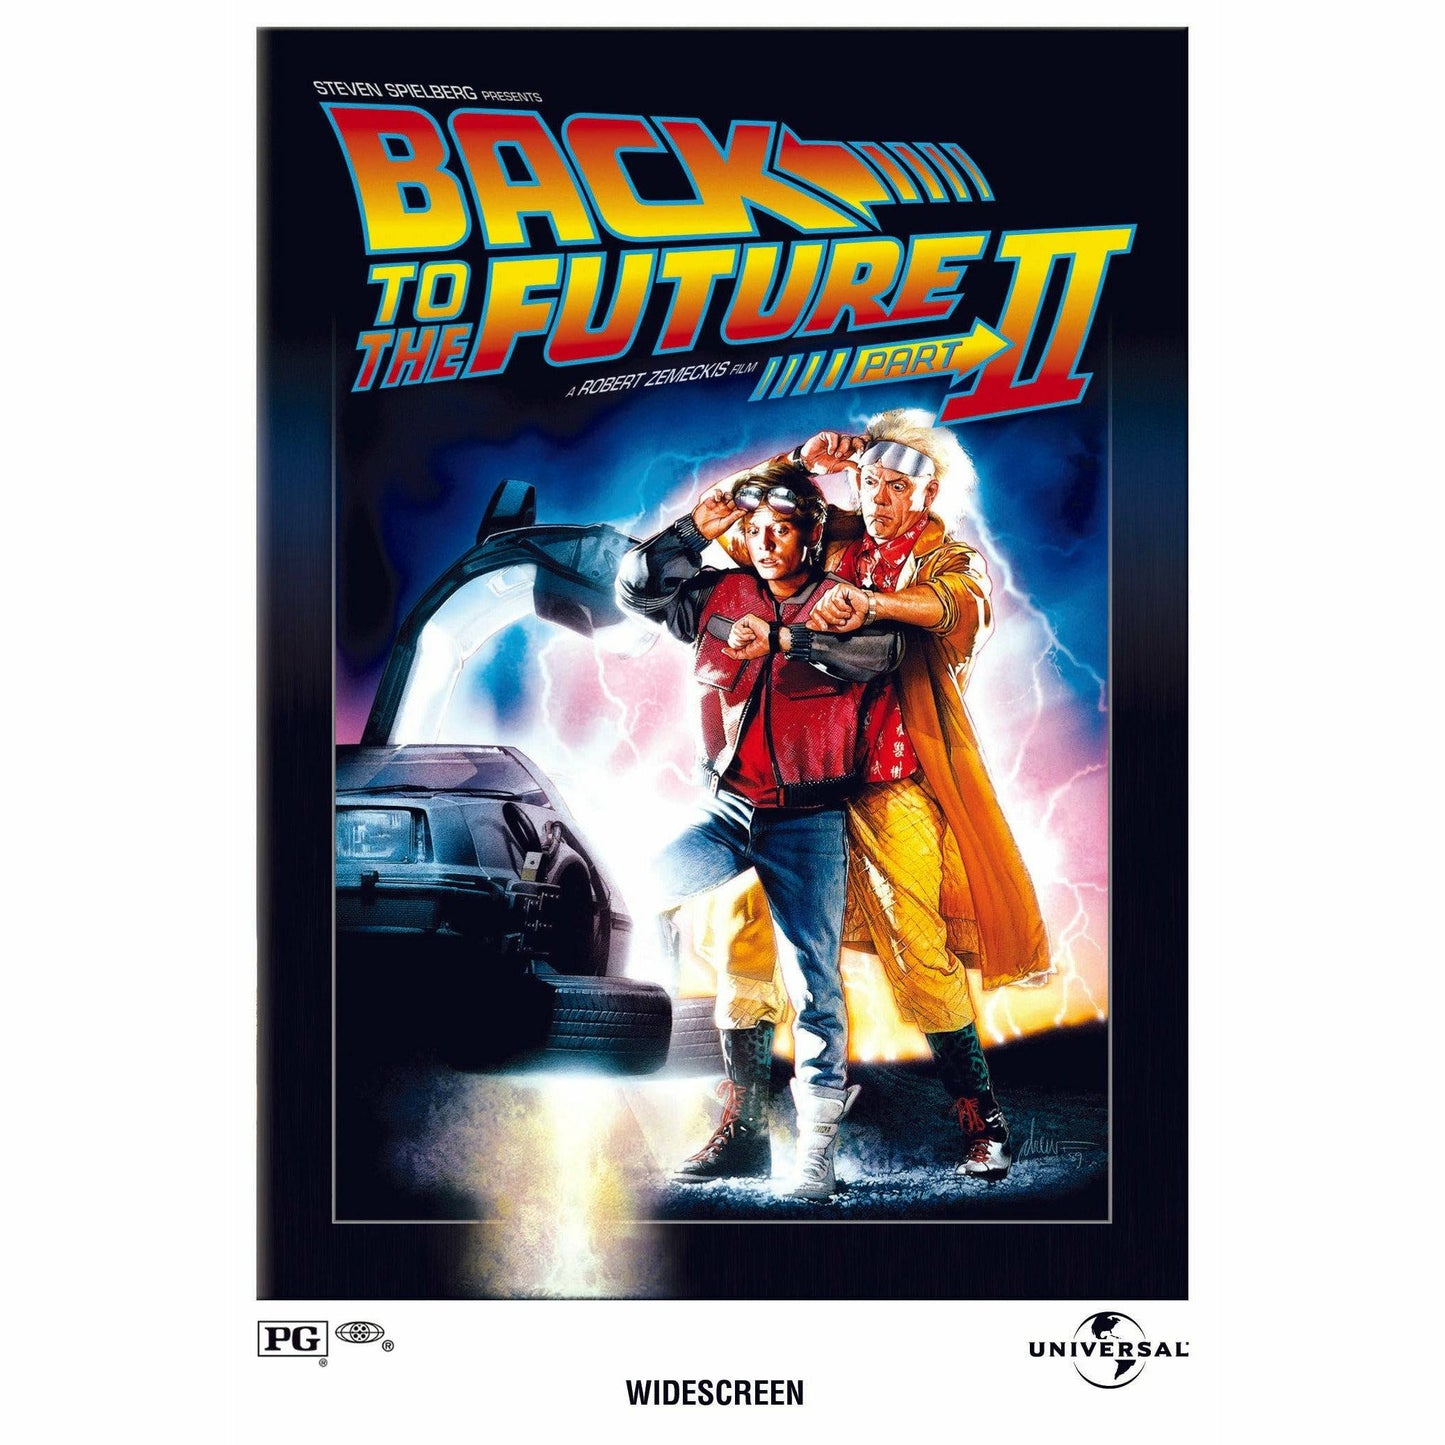 Back to the Future Part II (DVD)